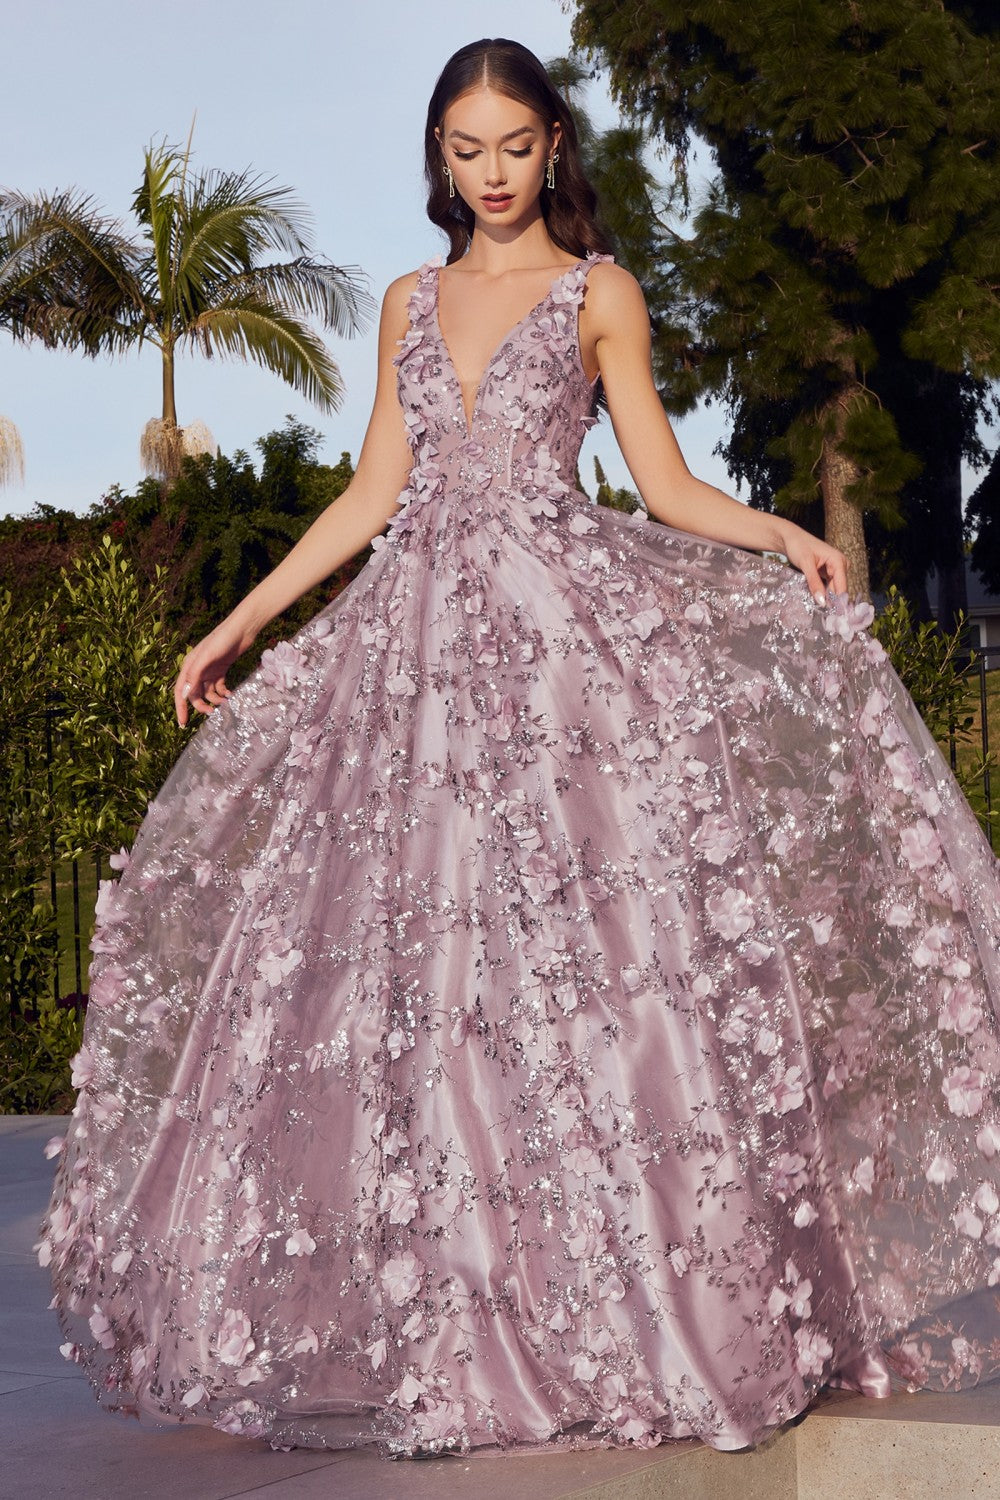 CD J838 - Glitter Print A-Line Prom Gown with 3D floral Applique & Sheer Boned Corset Bodice PROM GOWN Cinderella Divine 4 MAUVE 